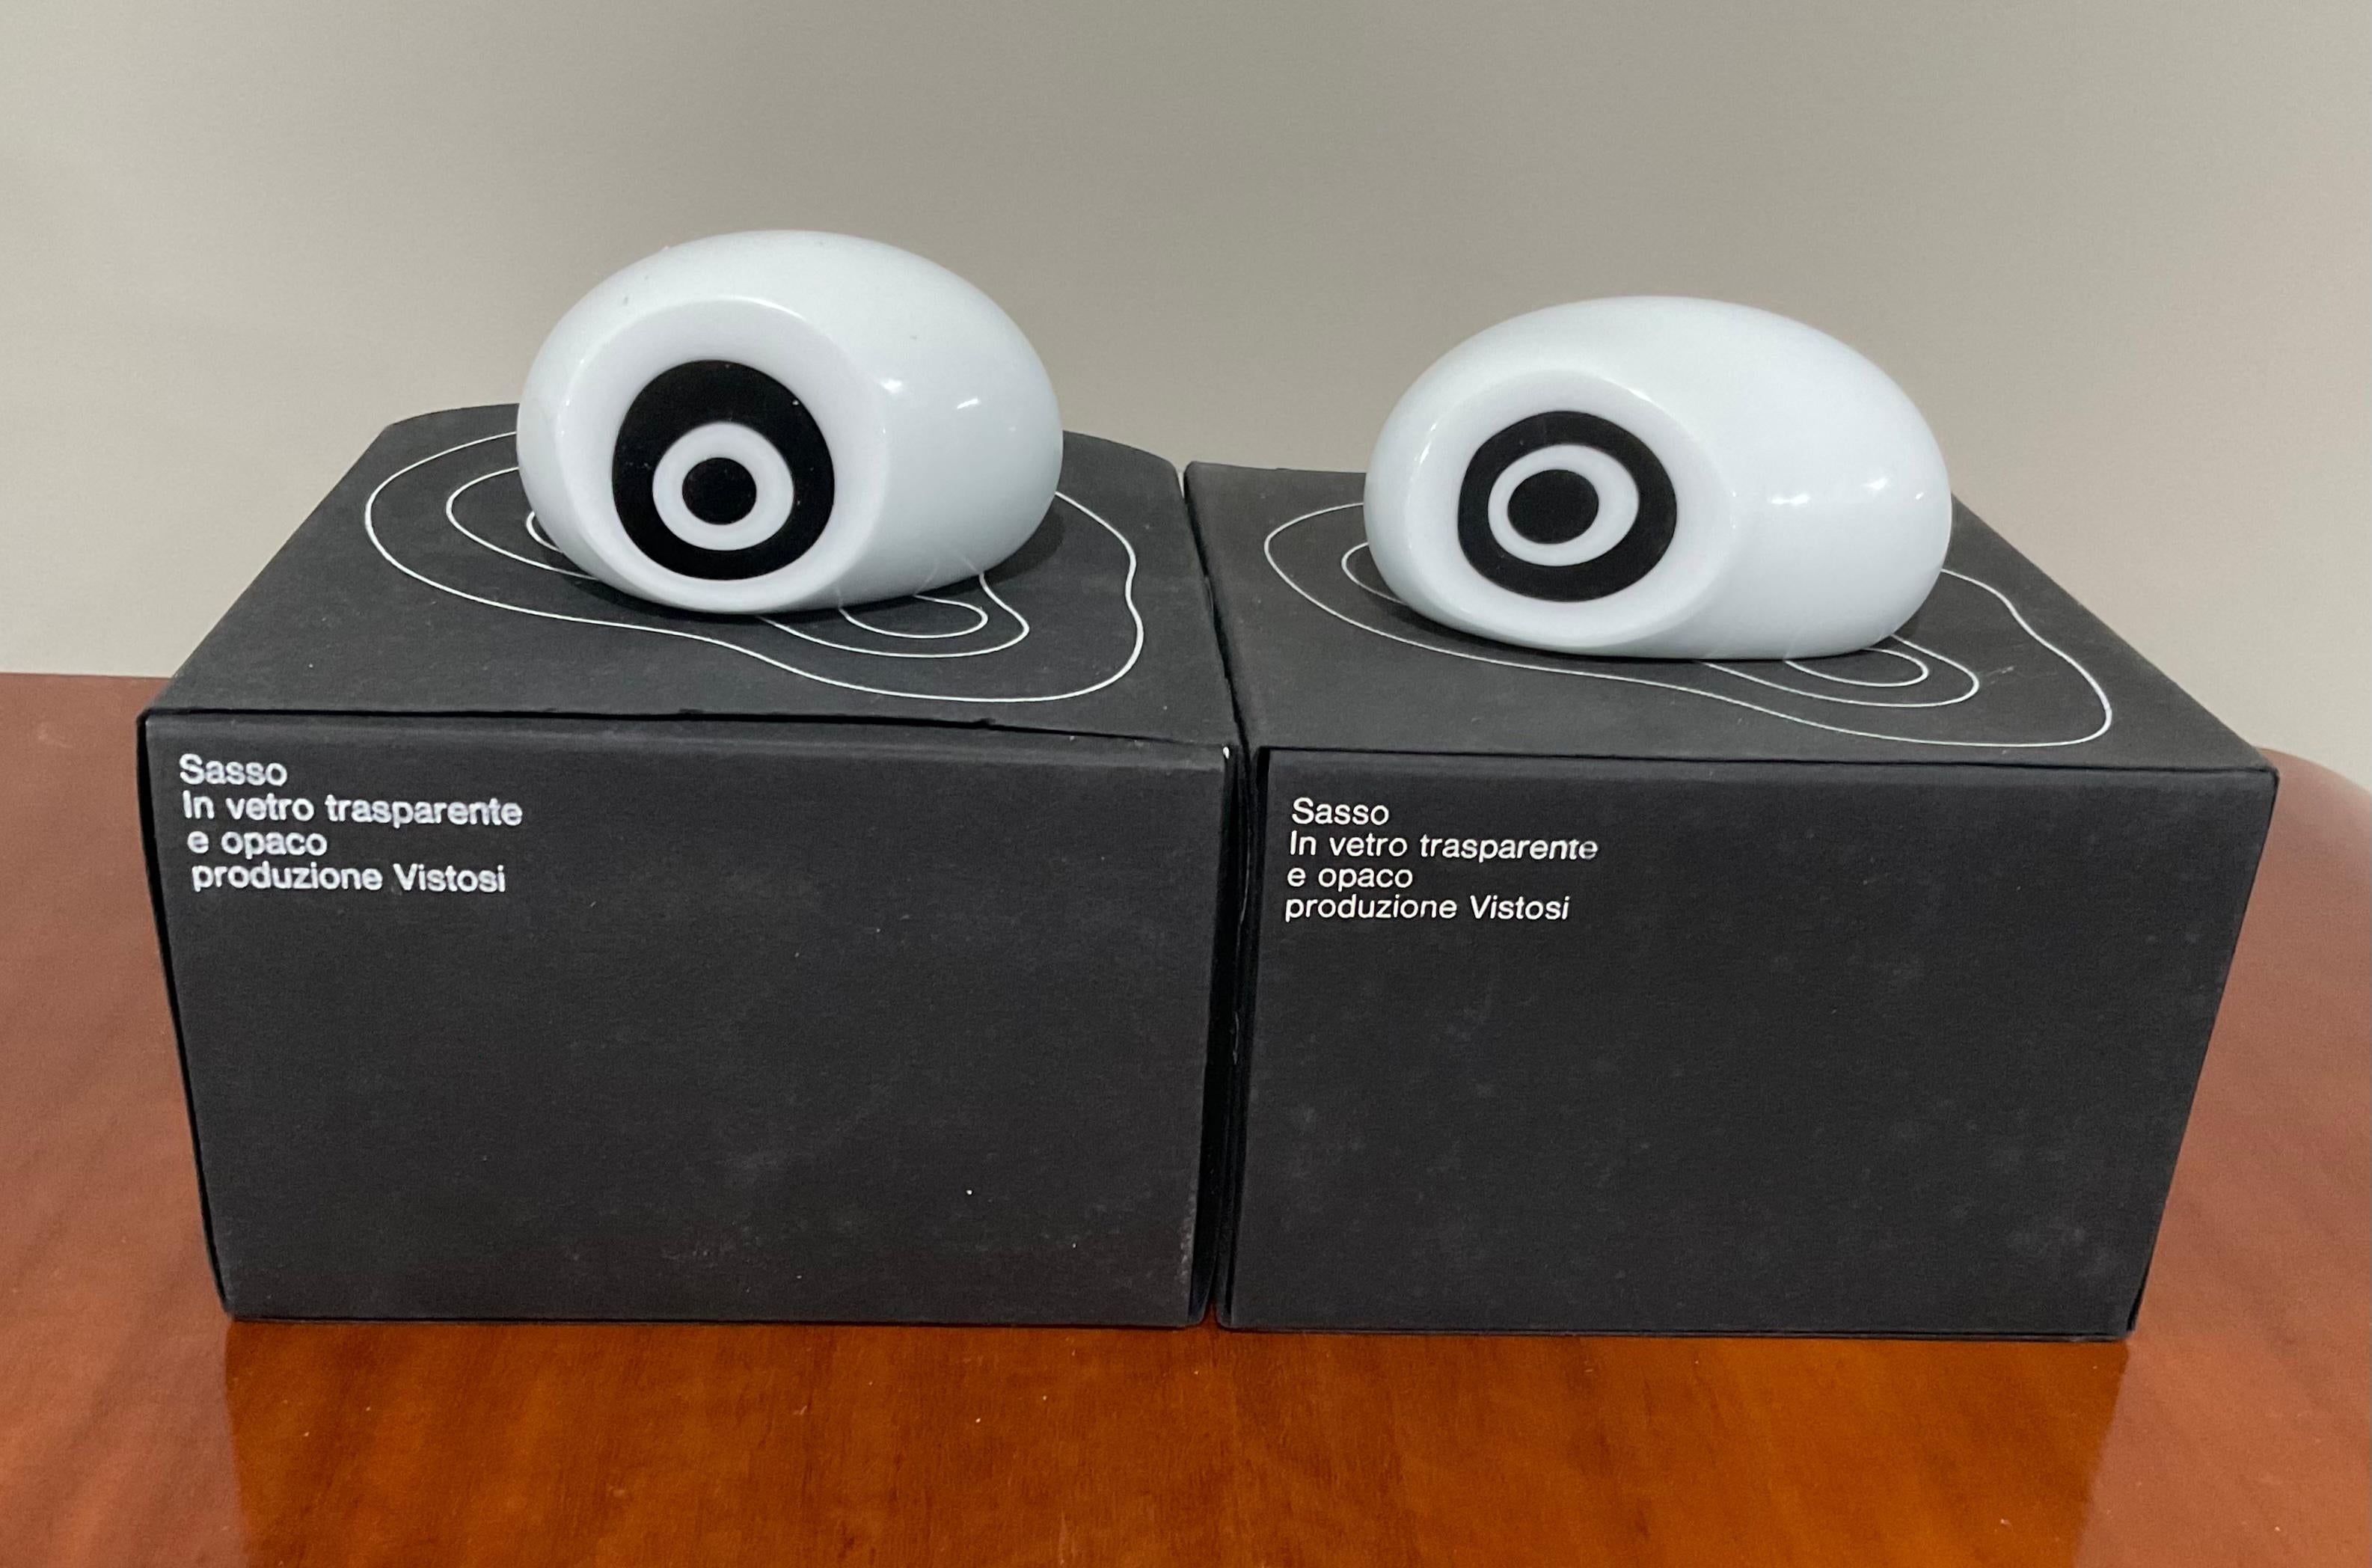 New Old stock pair of Vistosi Murano S562 Sasso Stone hand blown glass objects to resemble eyes. Both in the pair retain the original box and packaging. Brilliant white color is the primary, with layered black. See the mirror image sculptures in